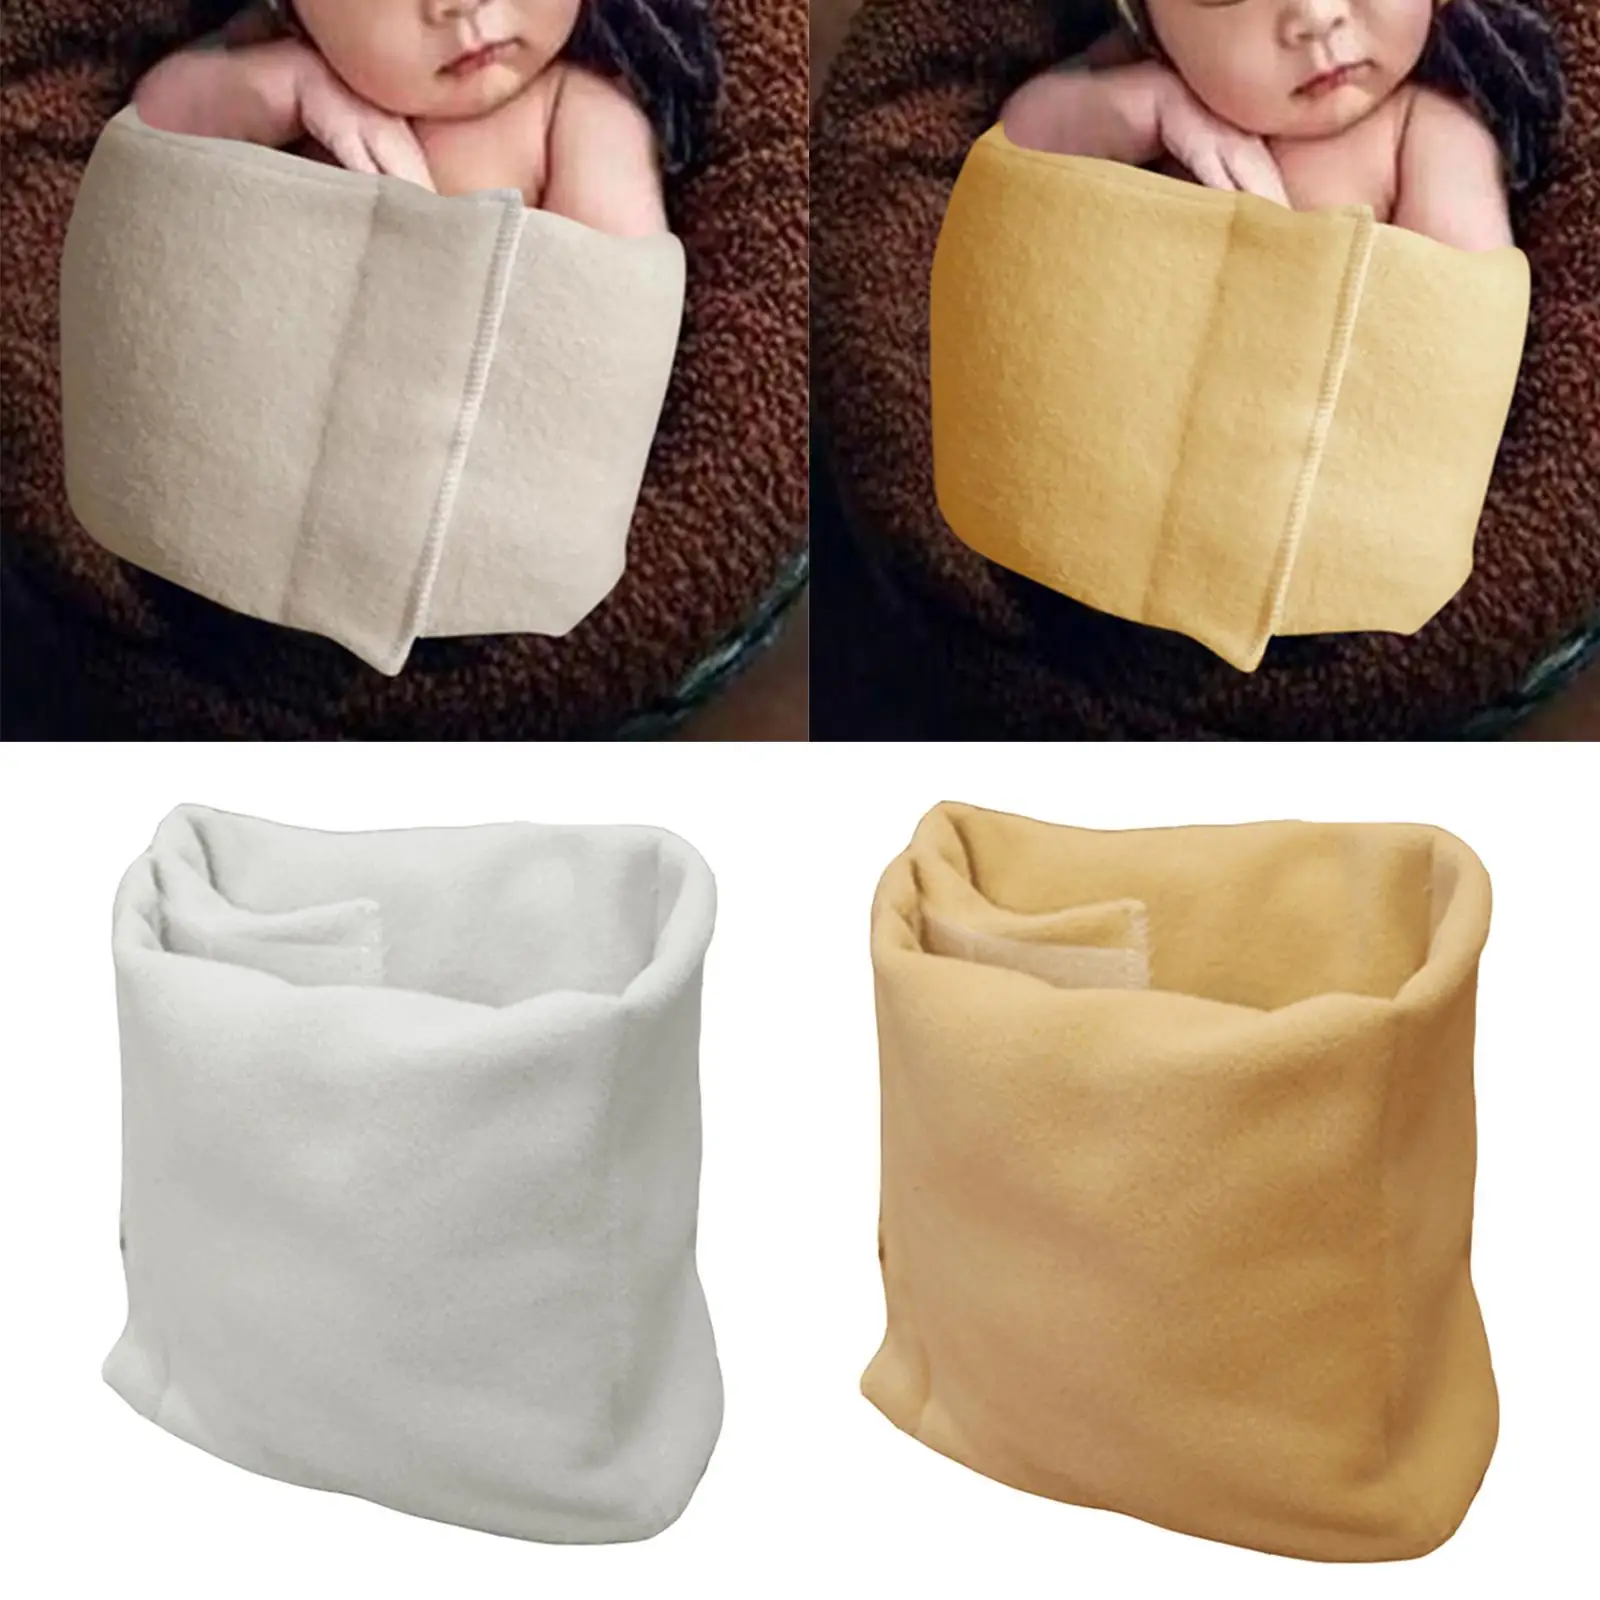 Newborn Photography Props Baby Wraps for Photo Shoot Studio Accessories